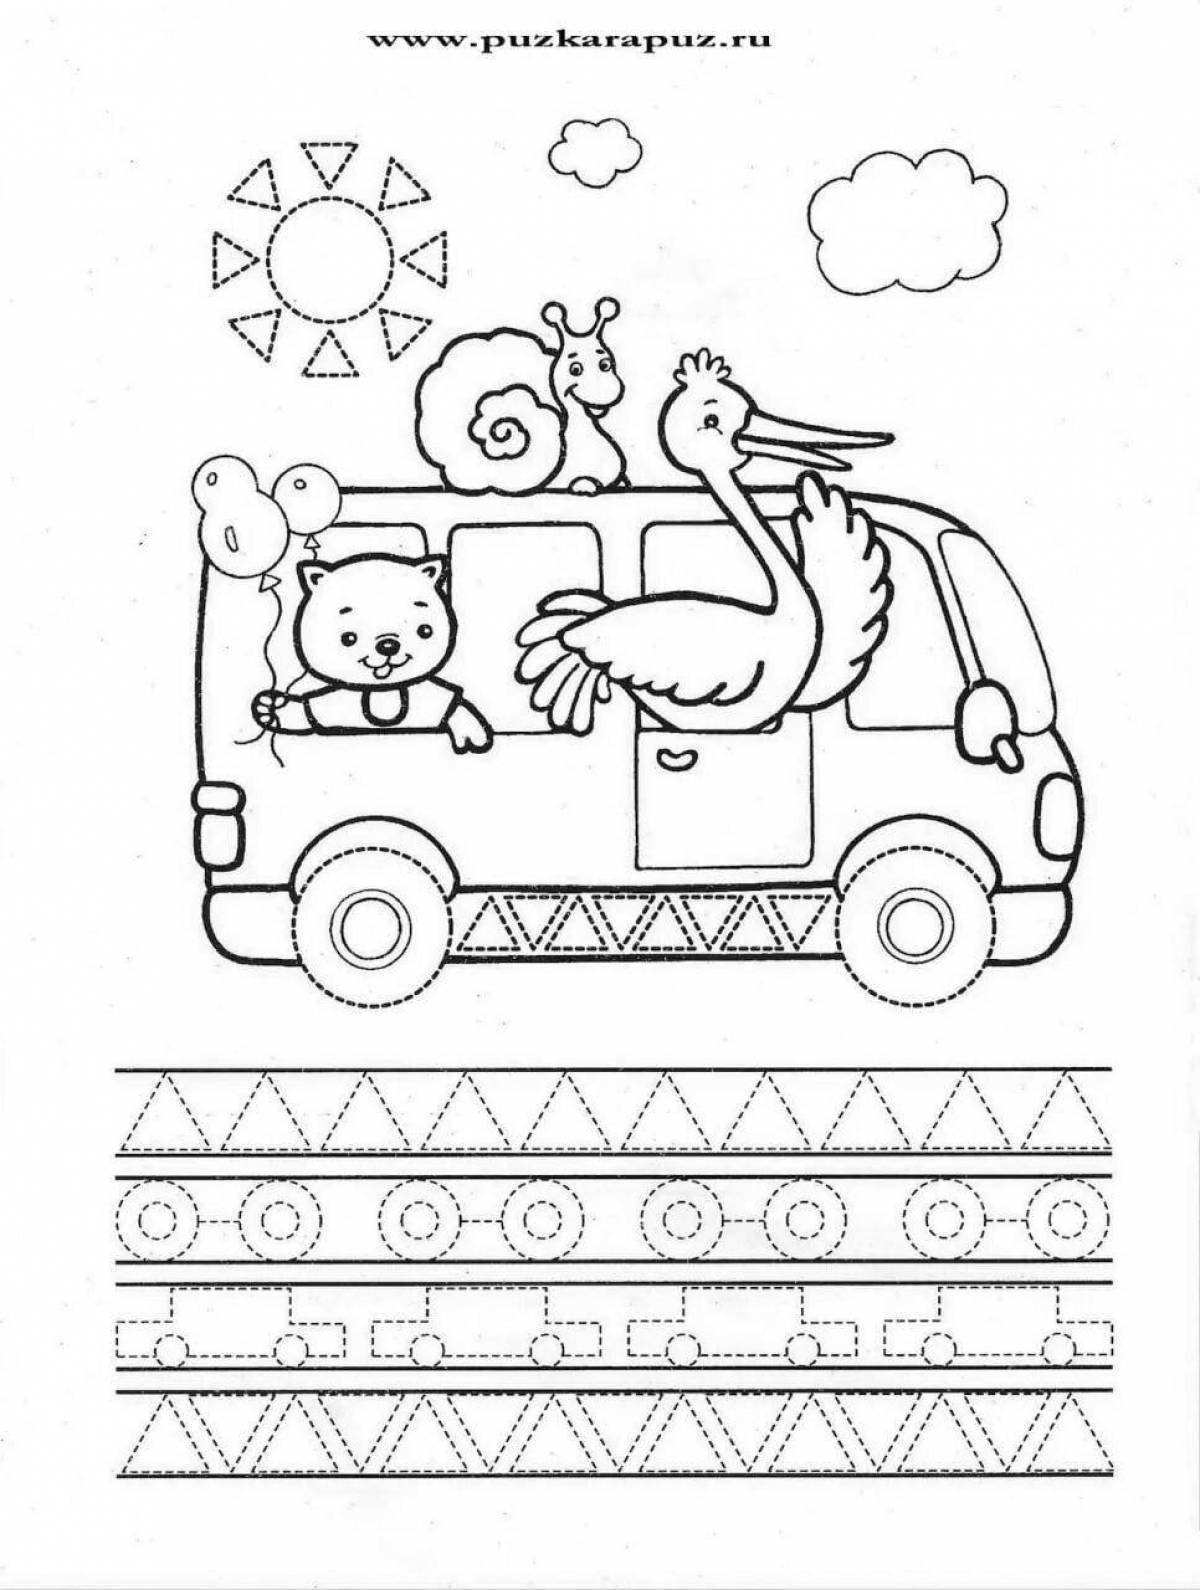 Creative coloring book for 7 year olds